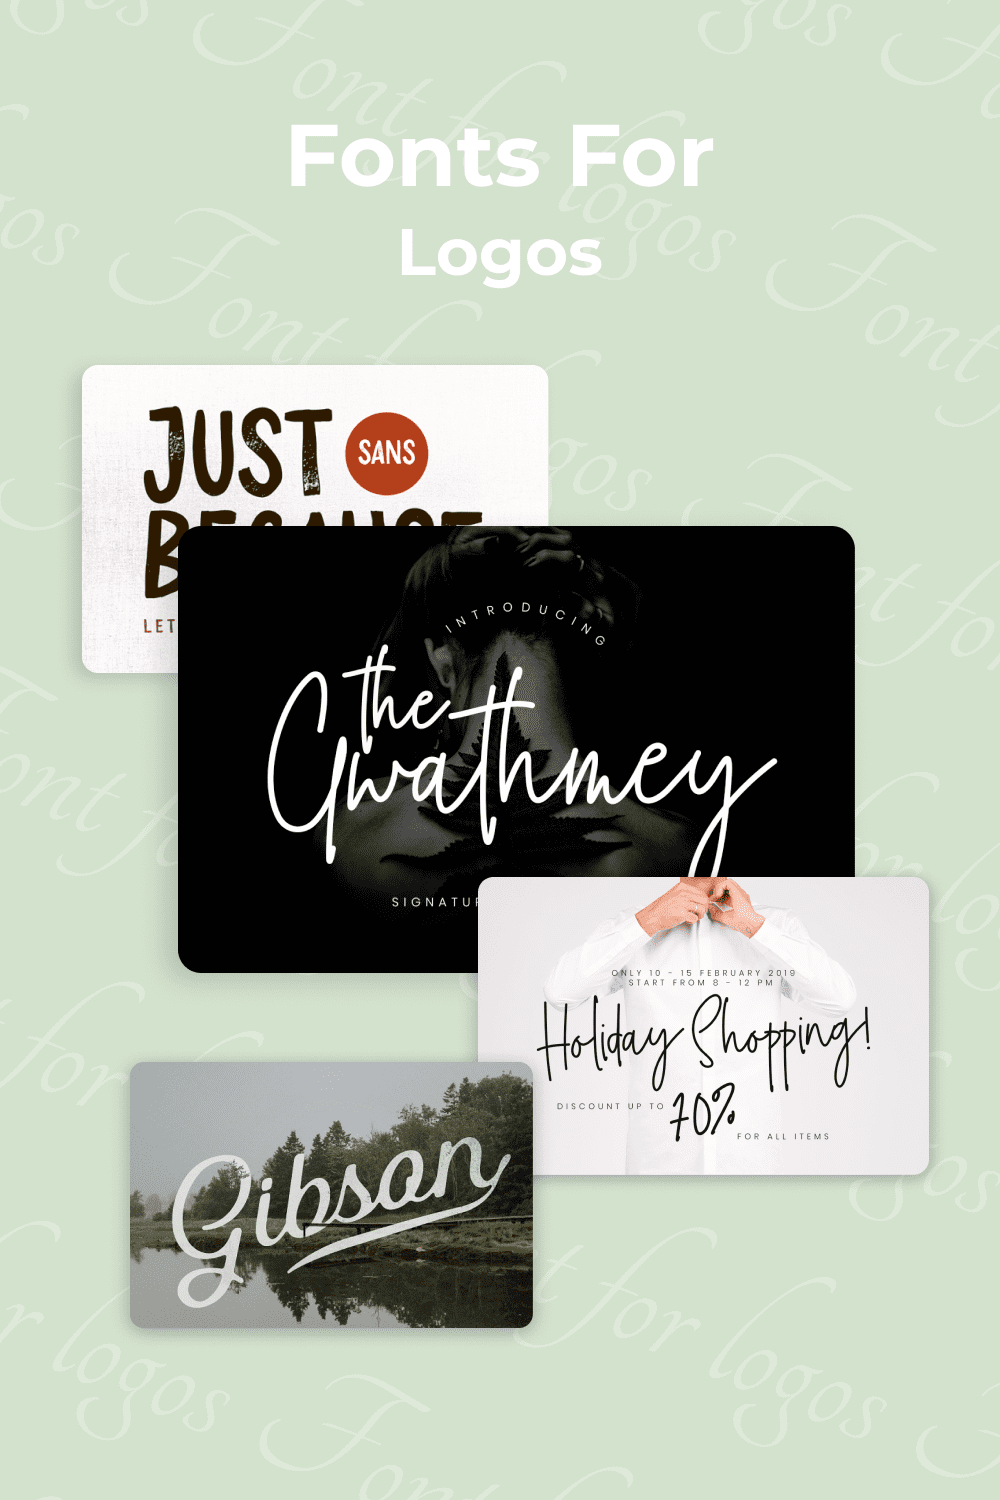 30 awesome fonts for logos and websites pinterest collage 886.